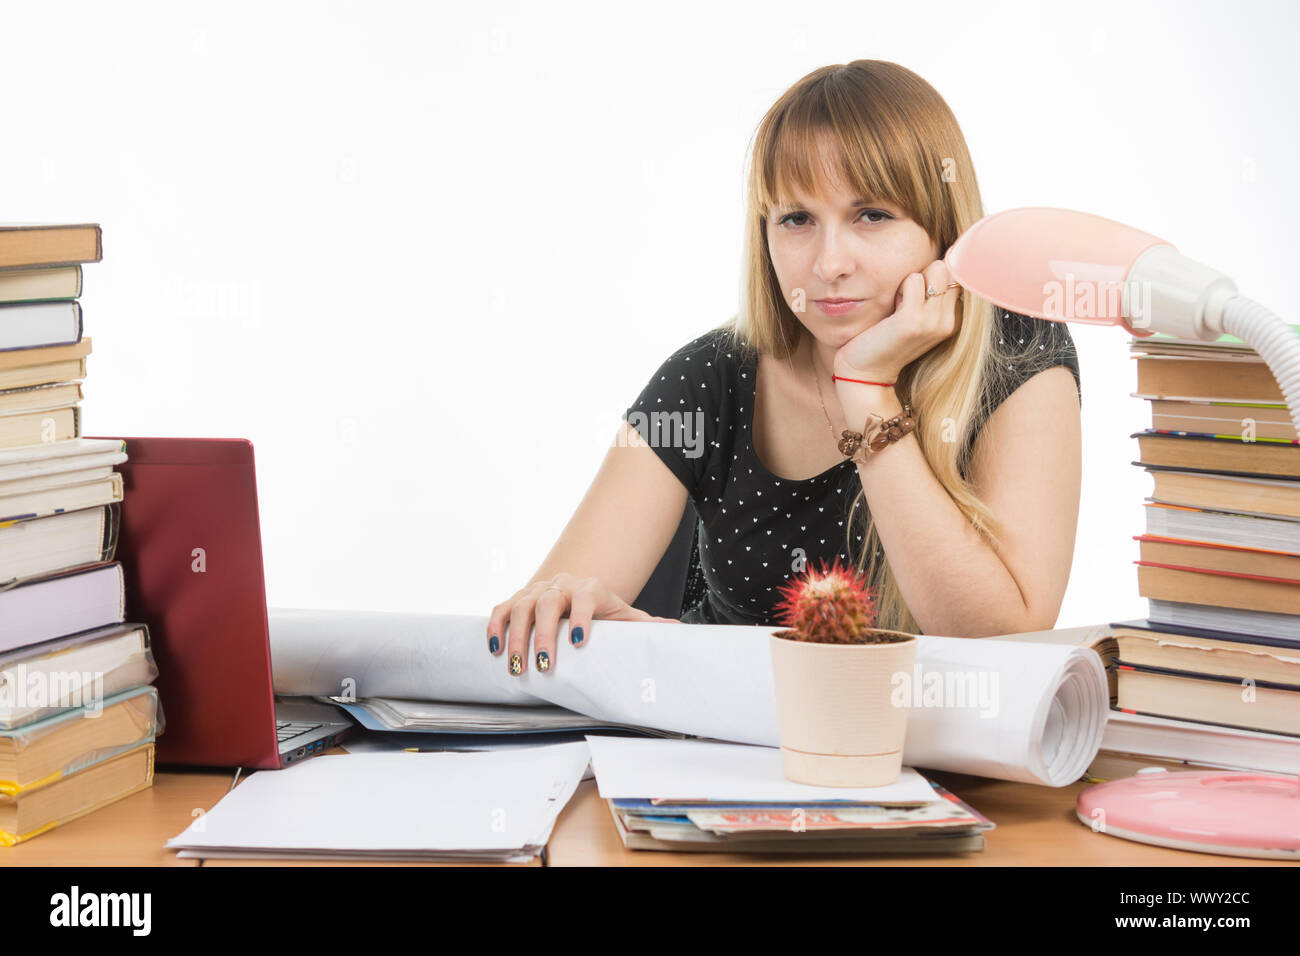 Student with contempt and weariness looks in the frame Stock Photo